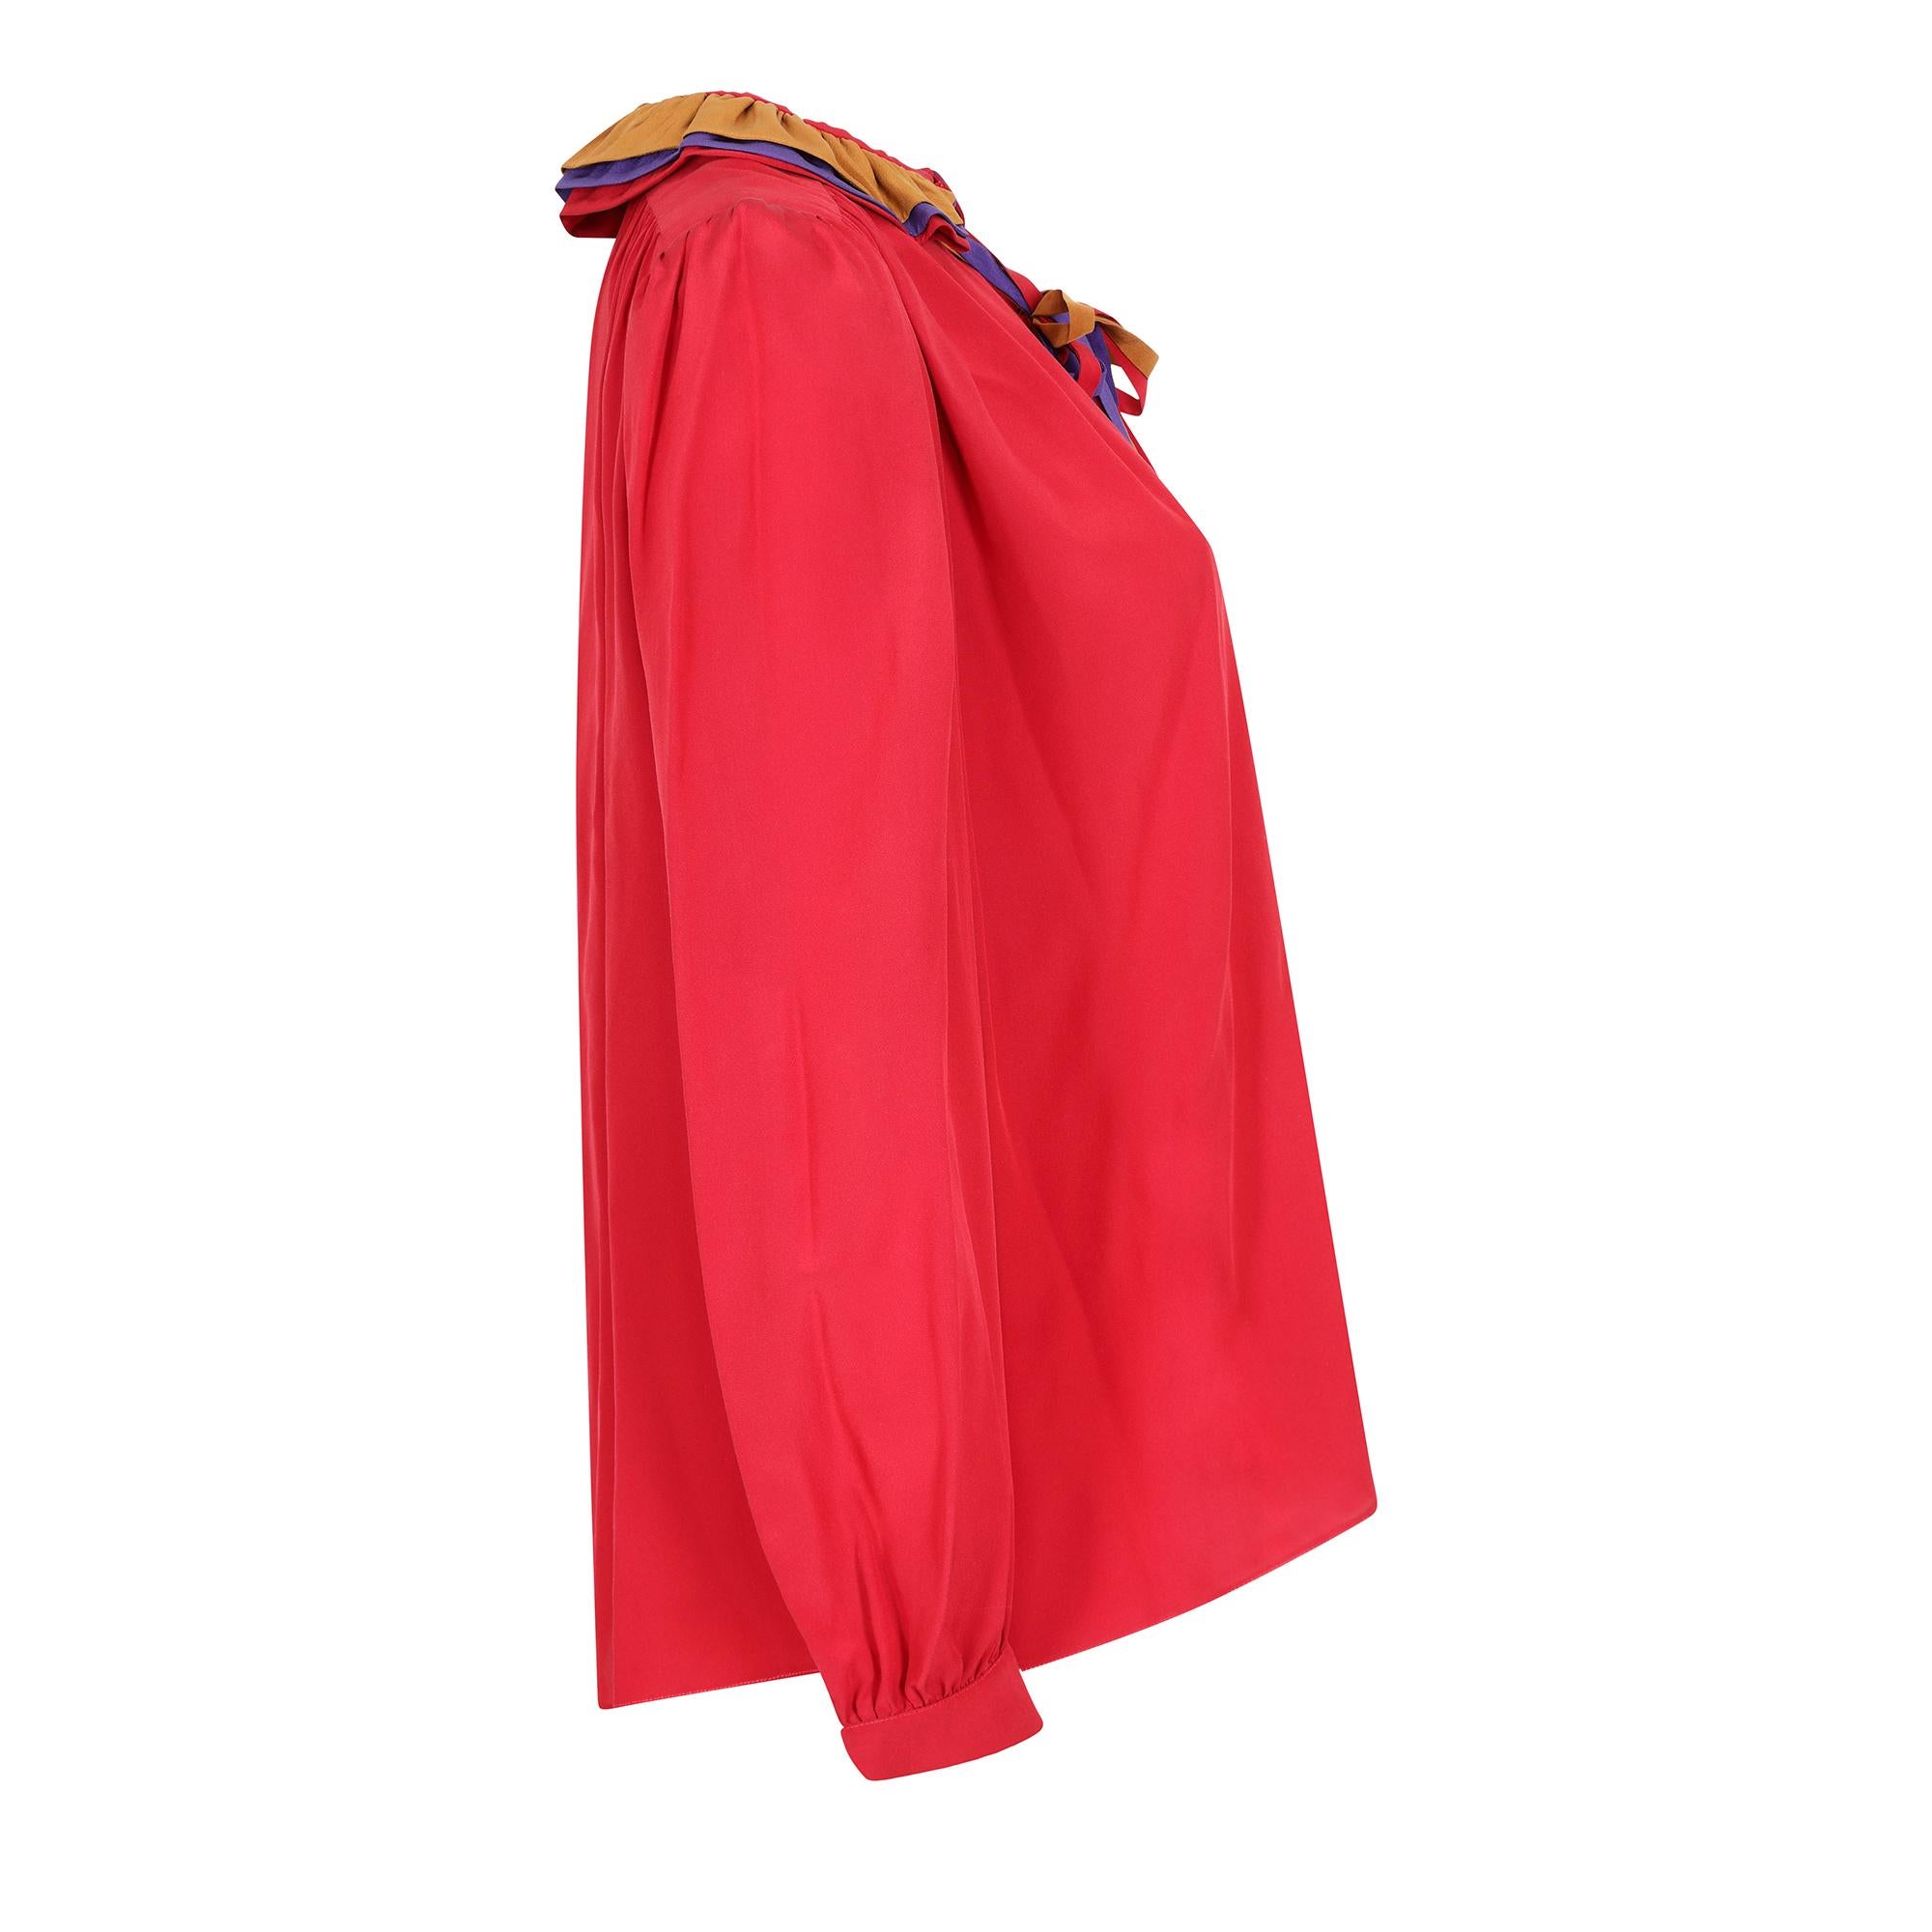 Original vintage Ted Lapidus ruffle collar red silk blouse. A great example of 1970s day wear from this renowned but under the radar French designer. The blouse has a poet look about it with generous amounts of fabric in the bodice and sleeves. This